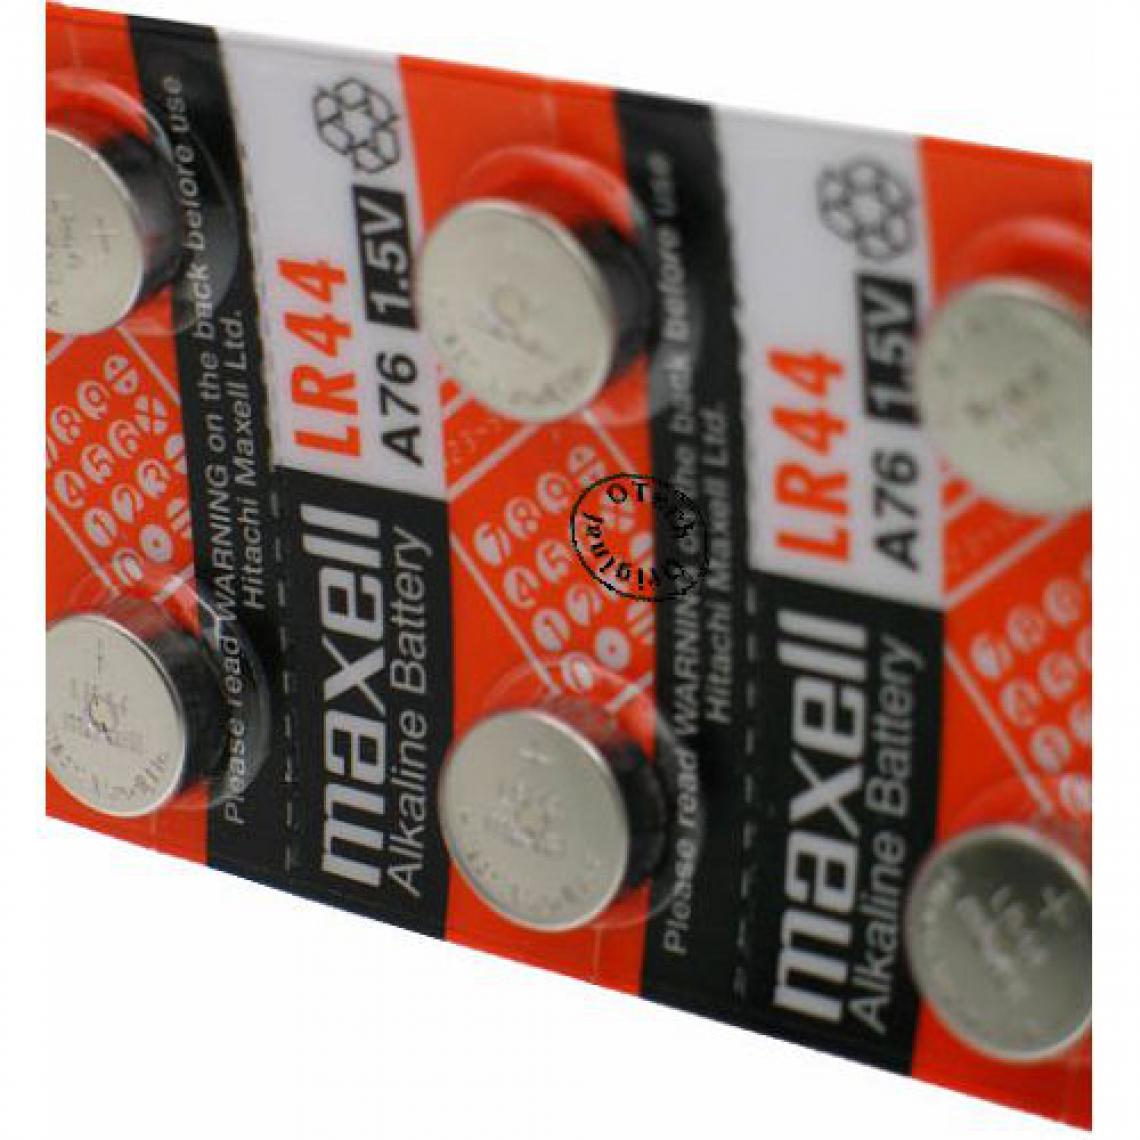 Otech - Pack de 10 piles maxell pour MAXELL GPA76 - Piles rechargeables